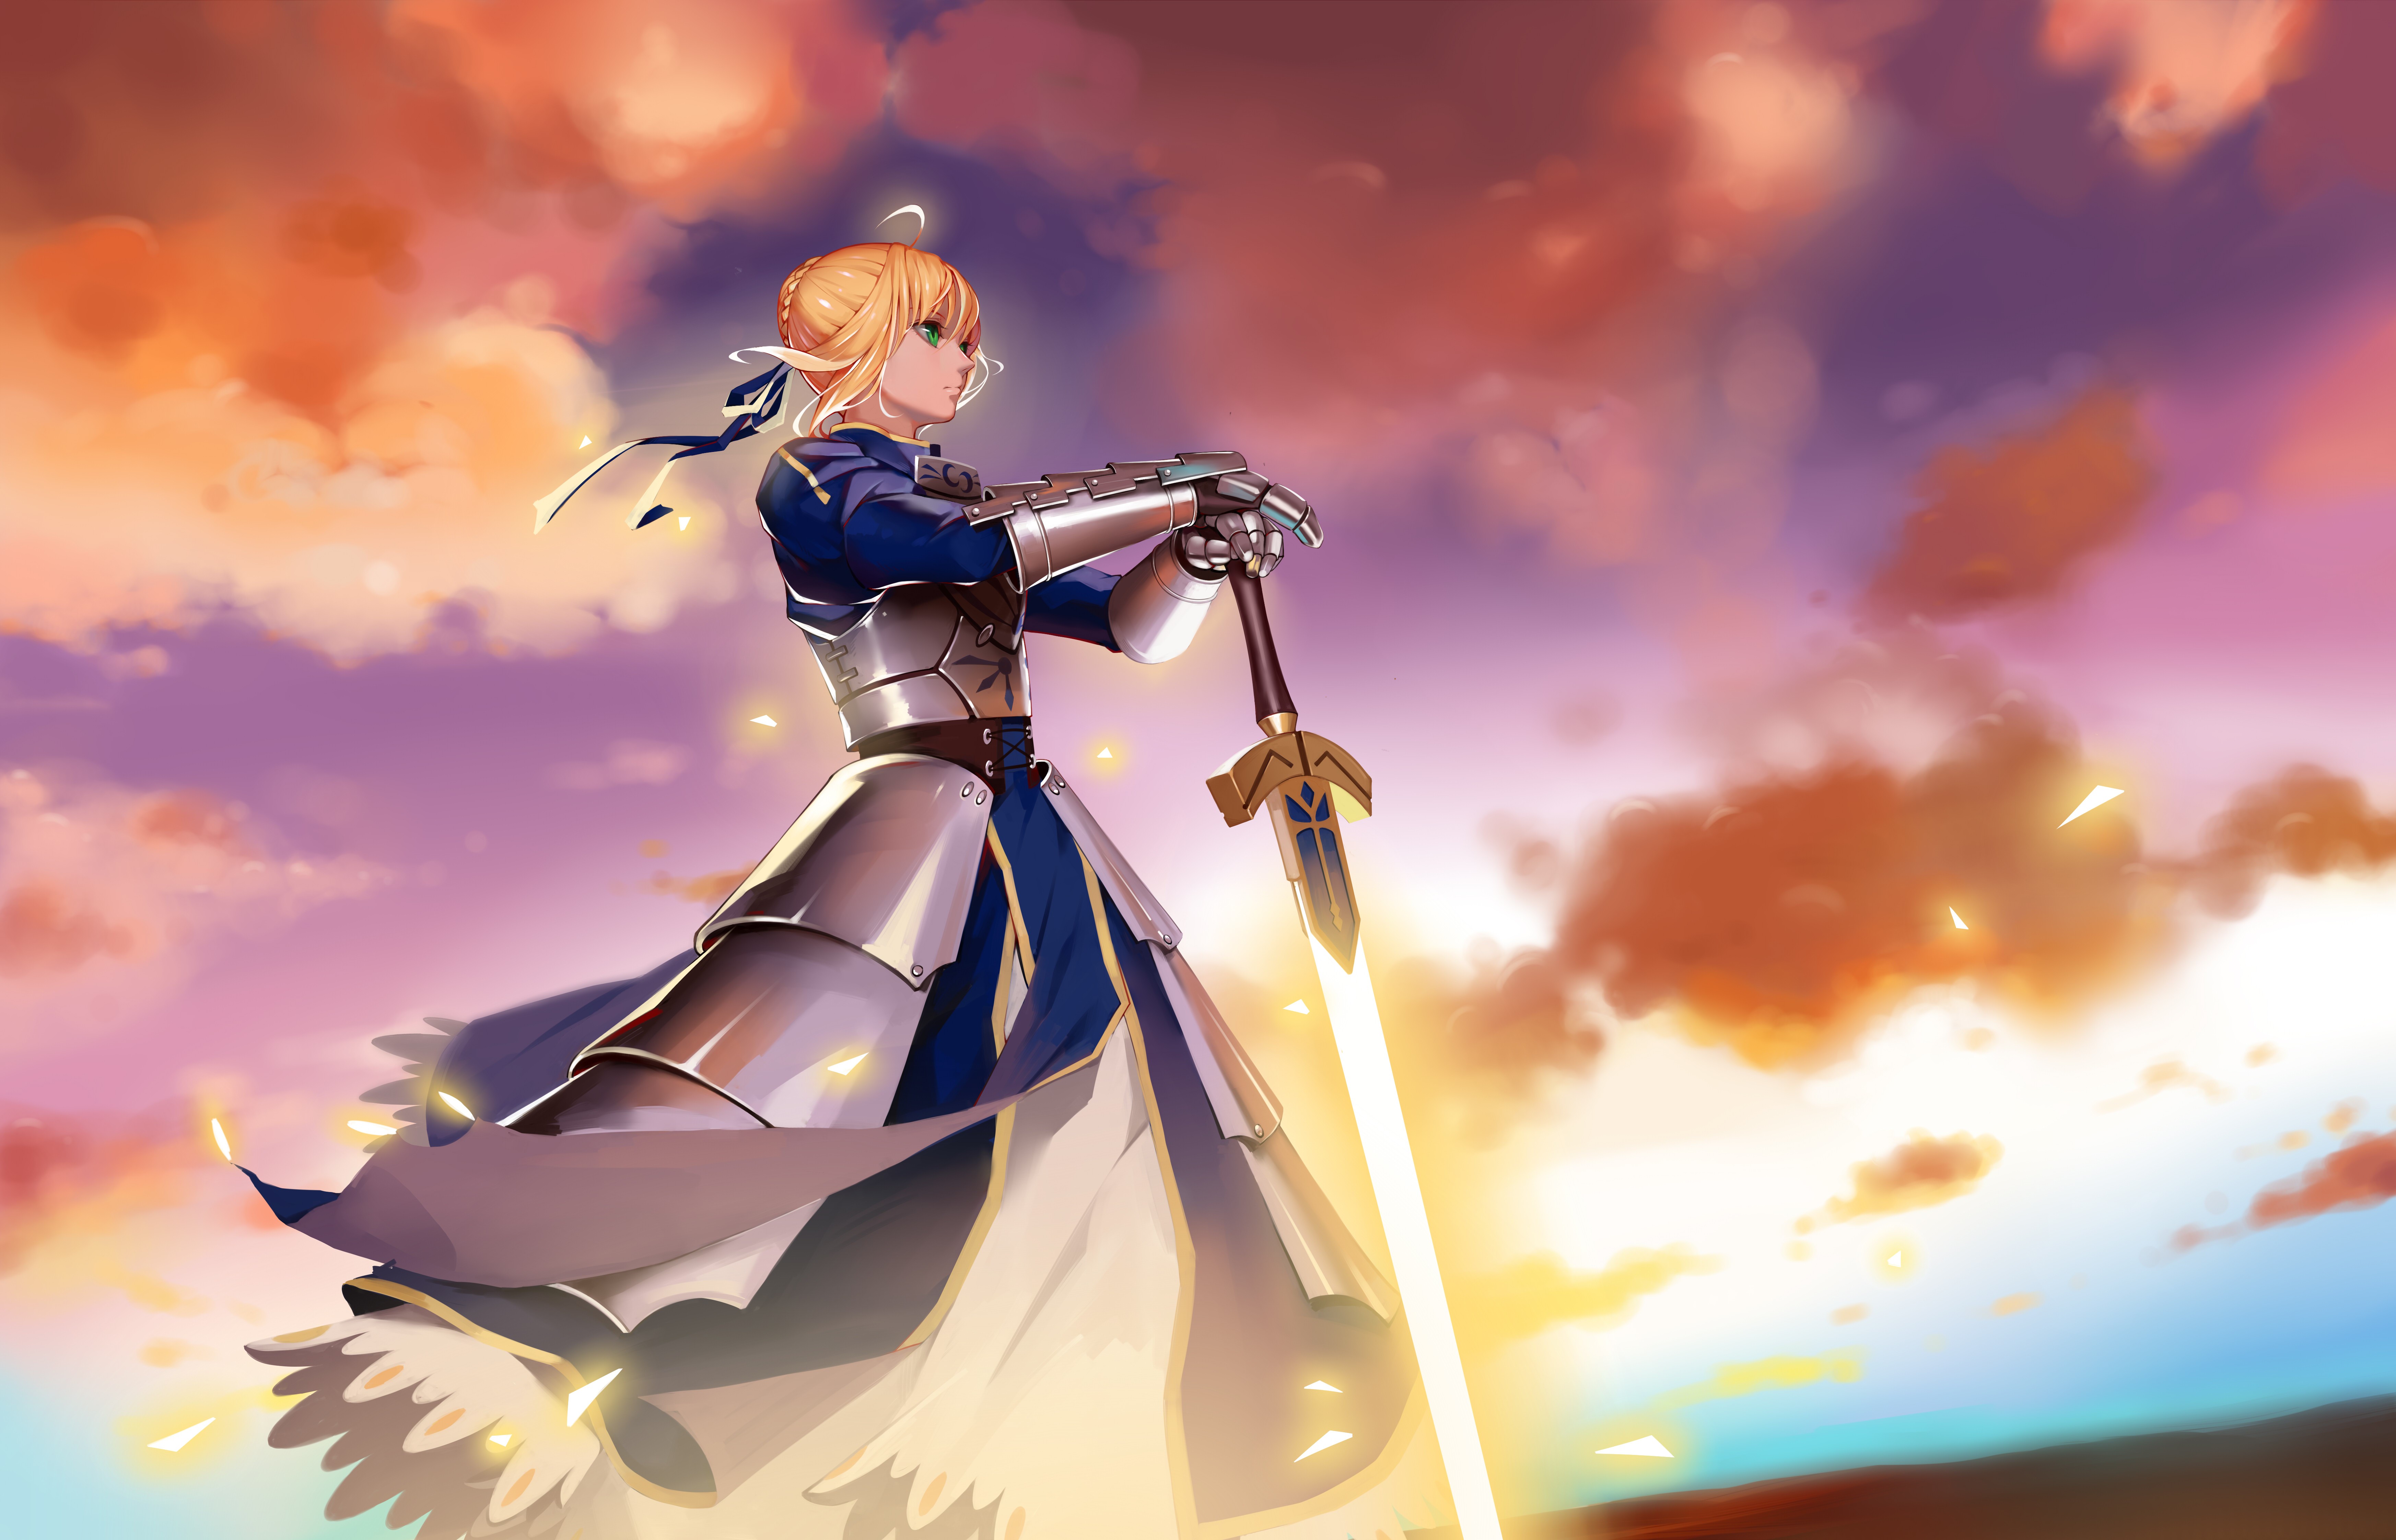 Anime 6983x4488 anime anime girls Fate/Stay Night Saber short hair green eyes Fate series female warrior women with swords ahoge armored woman blue dress sunset tied hair braids Artoria Pendragon Fate/Grand Order Fate/Zero 2D blue ribbons clouds gauntlets hairbun standing fan art blonde fantasy art fantasy girl girls with guns Pixiv armor fantasy armor sky